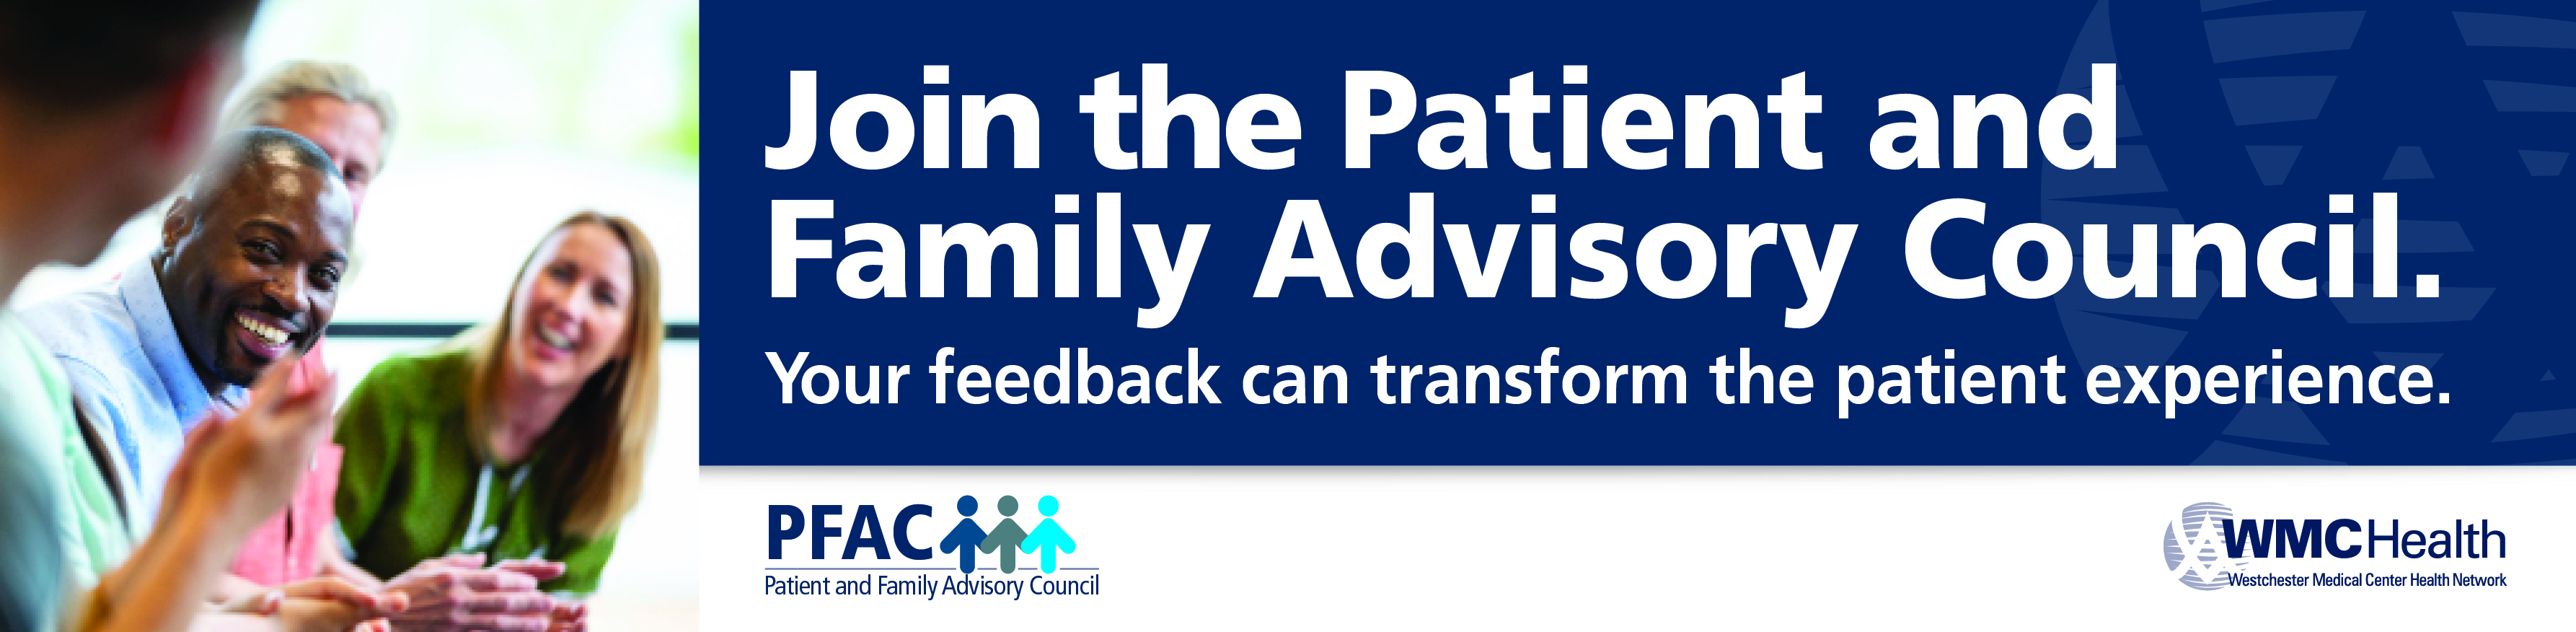 Join the Patient and Family Advisory Council